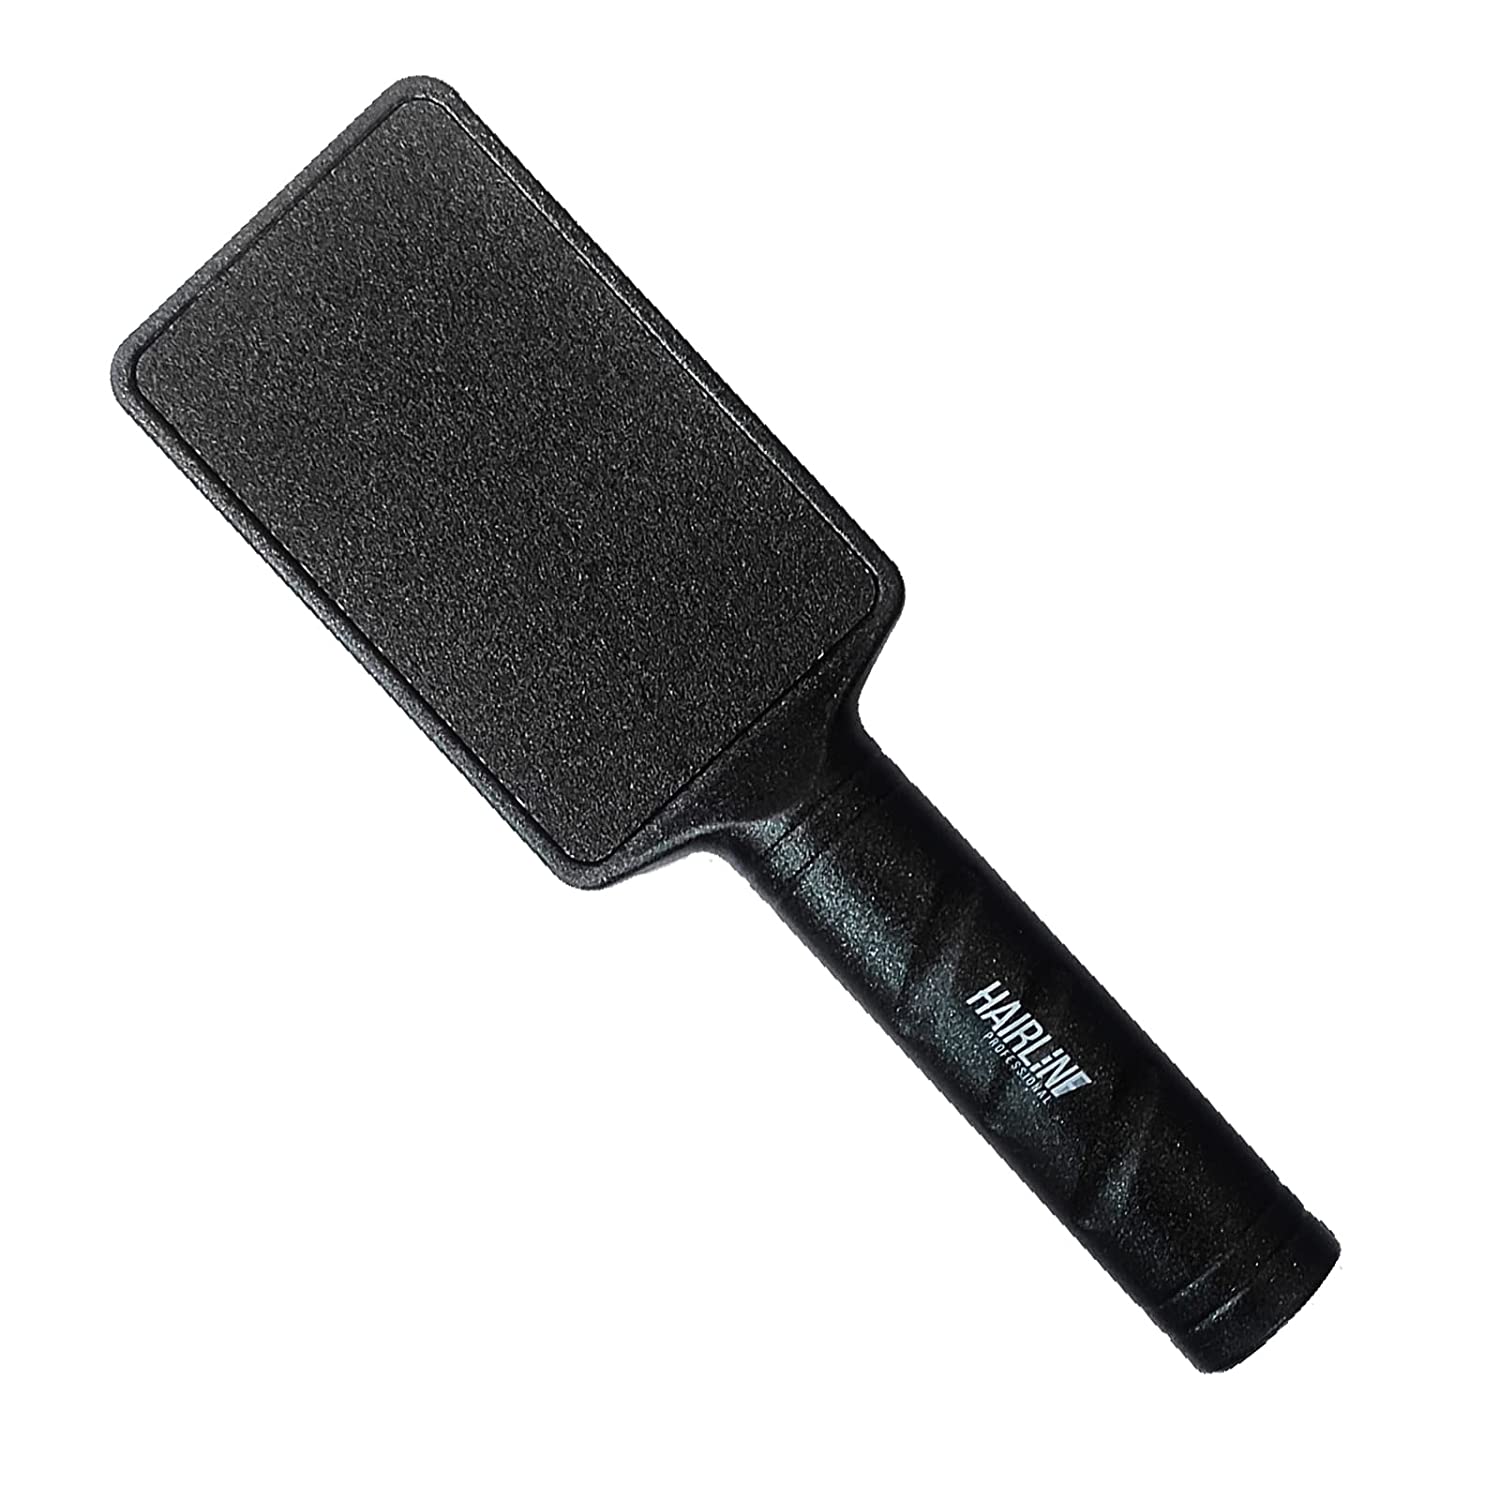 Buy Hair Line Professional Dual Sided Foot Scrubber,Filer with